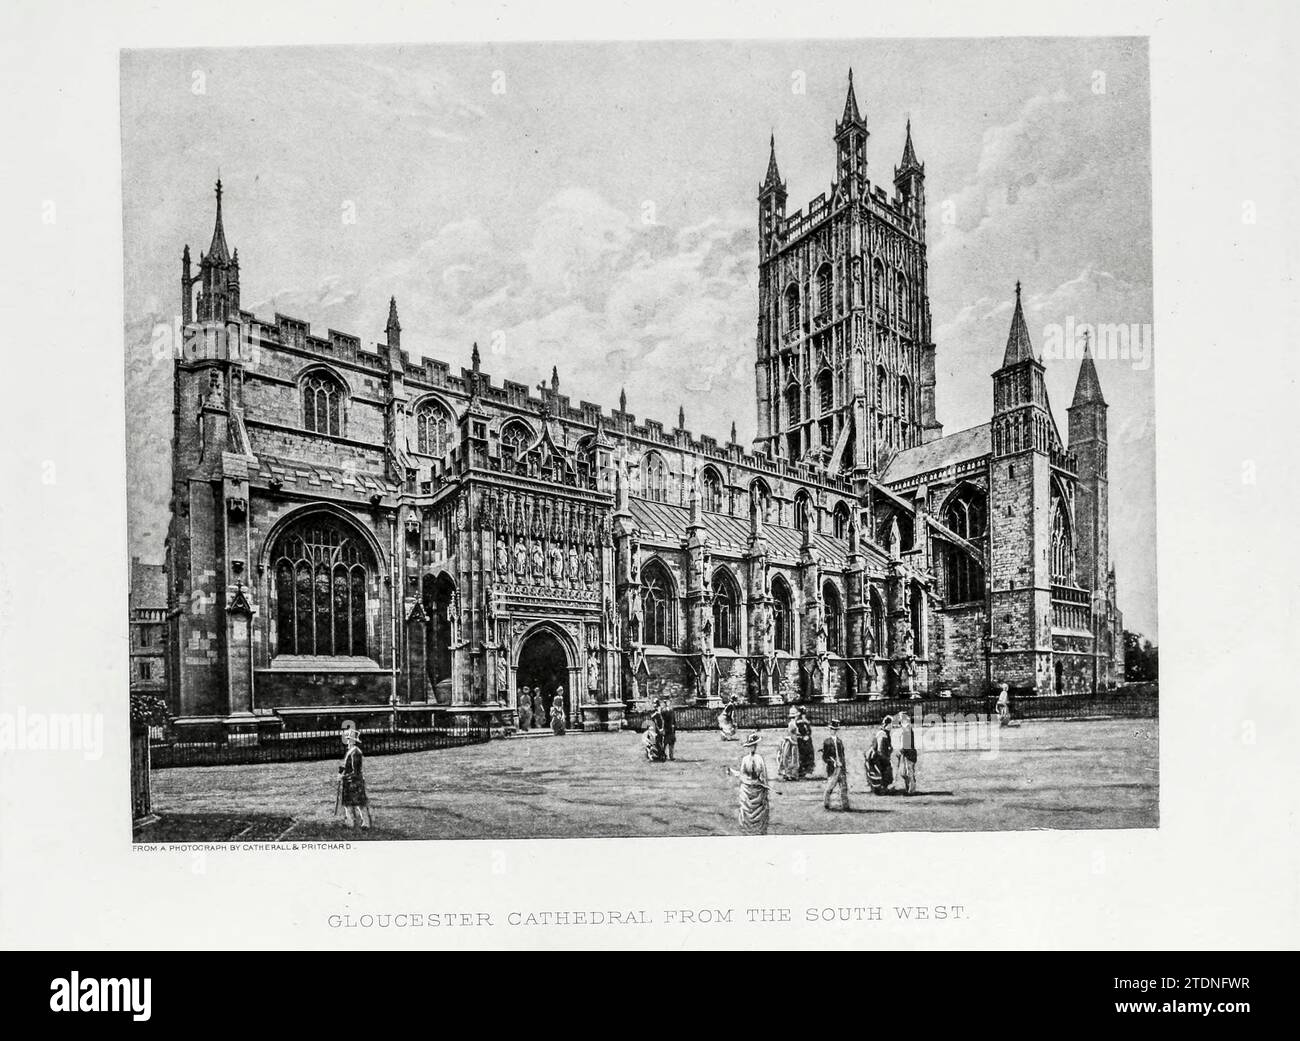 Gloucester Cathedral from the South West aus dem Buch Cathedrals, Abbeys and Church of England and Wales : Descriptive, Historical, Pictorial Band 1 von Bonney, T. G. (Thomas George), 1833–1923; Publisher London : Cassell 1890 Stockfoto